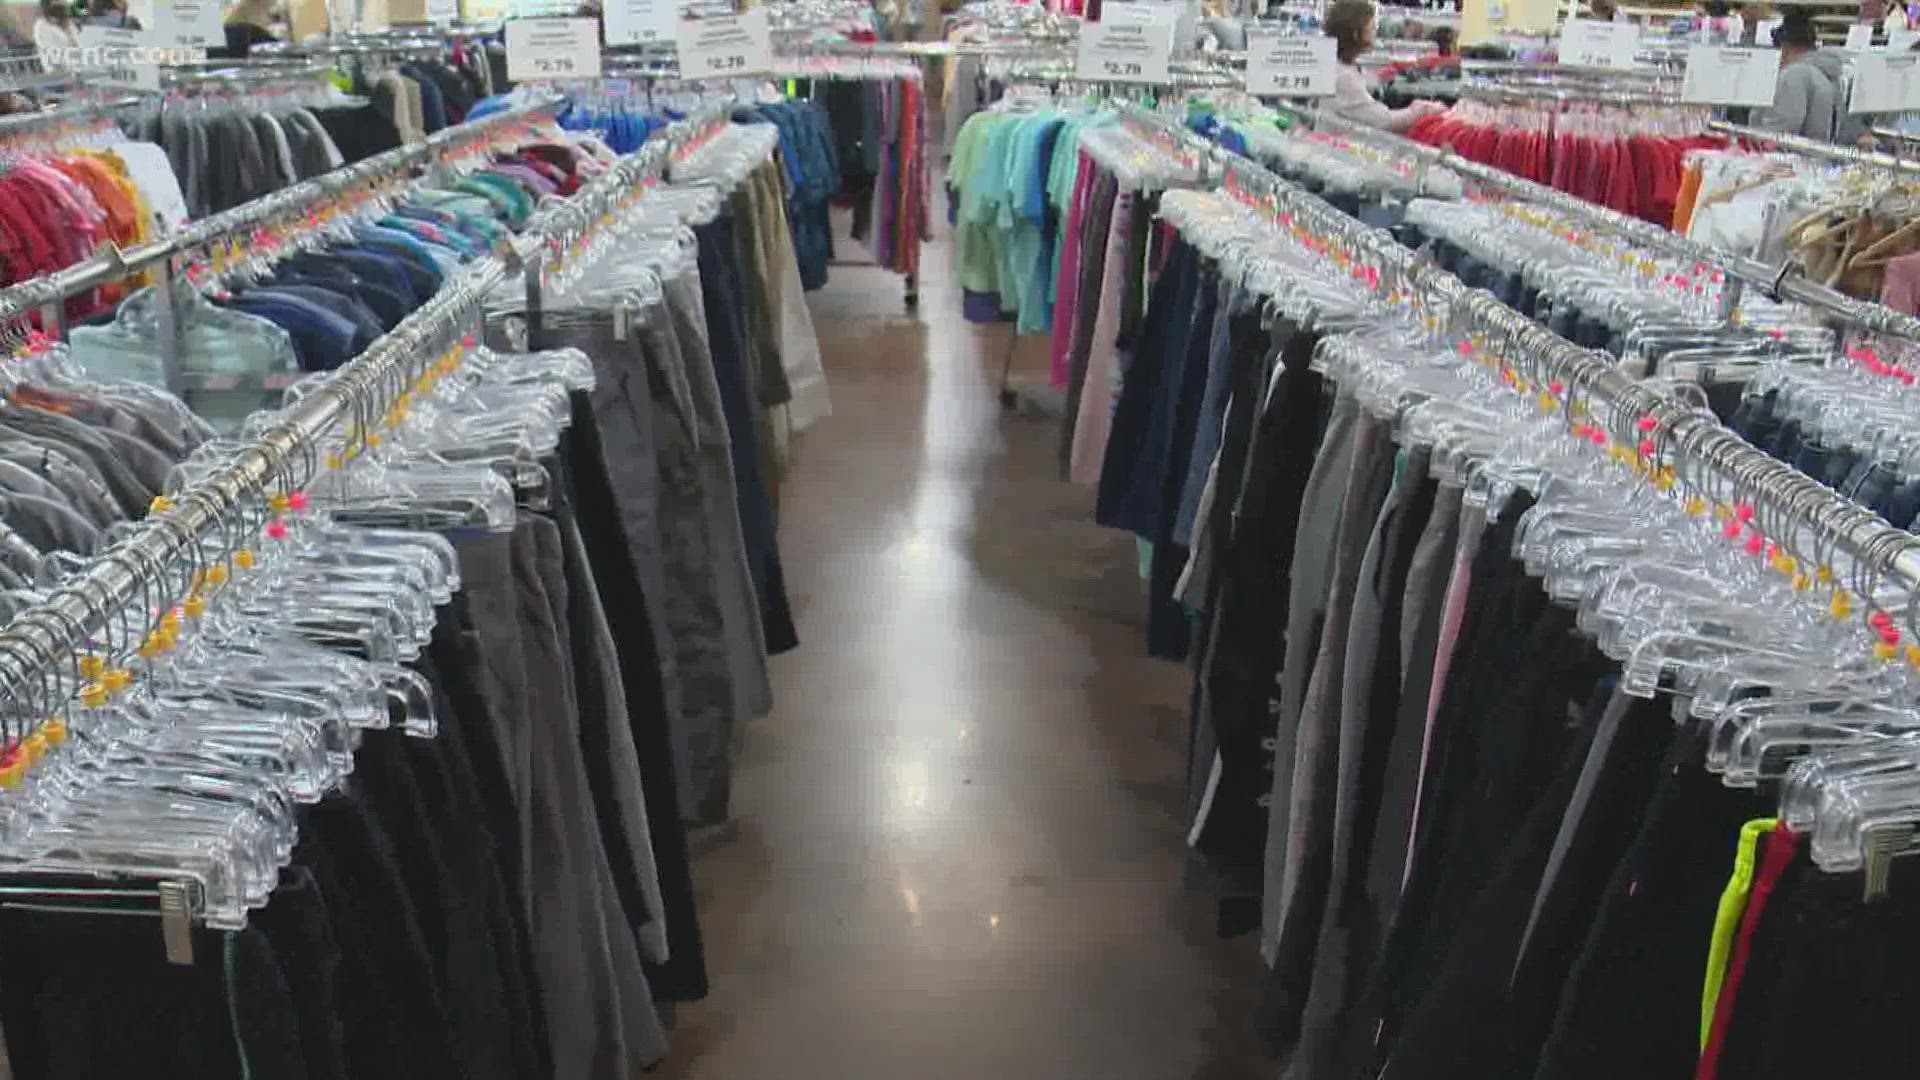 Goodwill says making a donation goes beyond giving an item a second chance. It can help provide job training and employment services for community members.